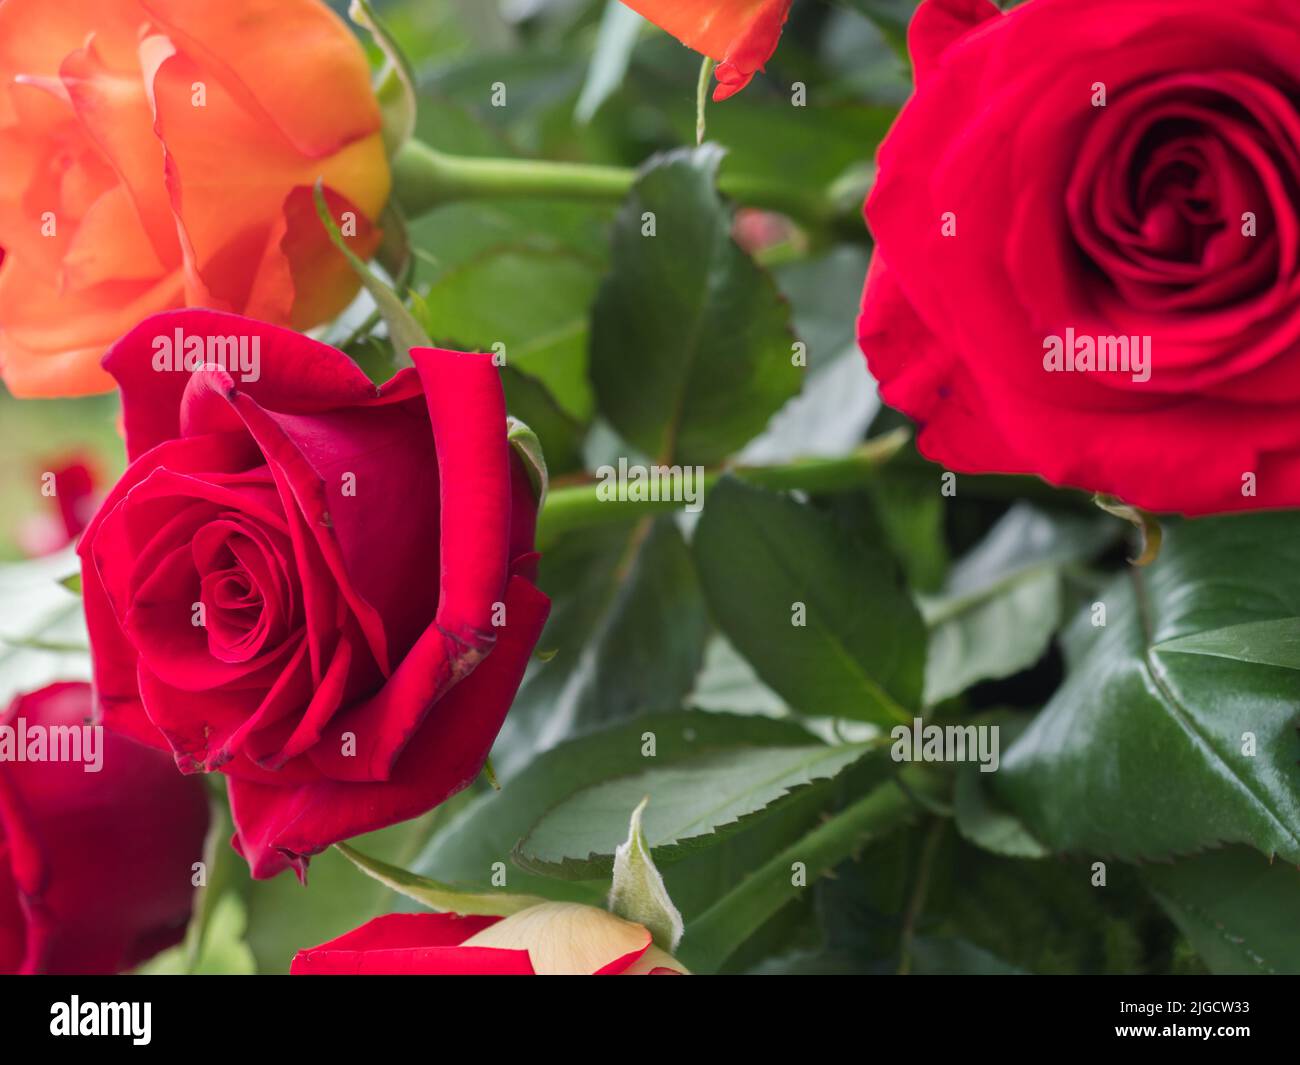 Blooming romantic fresh red rose. Flower rose 'Grande Amore' on the green and ohers roses background Stock Photo